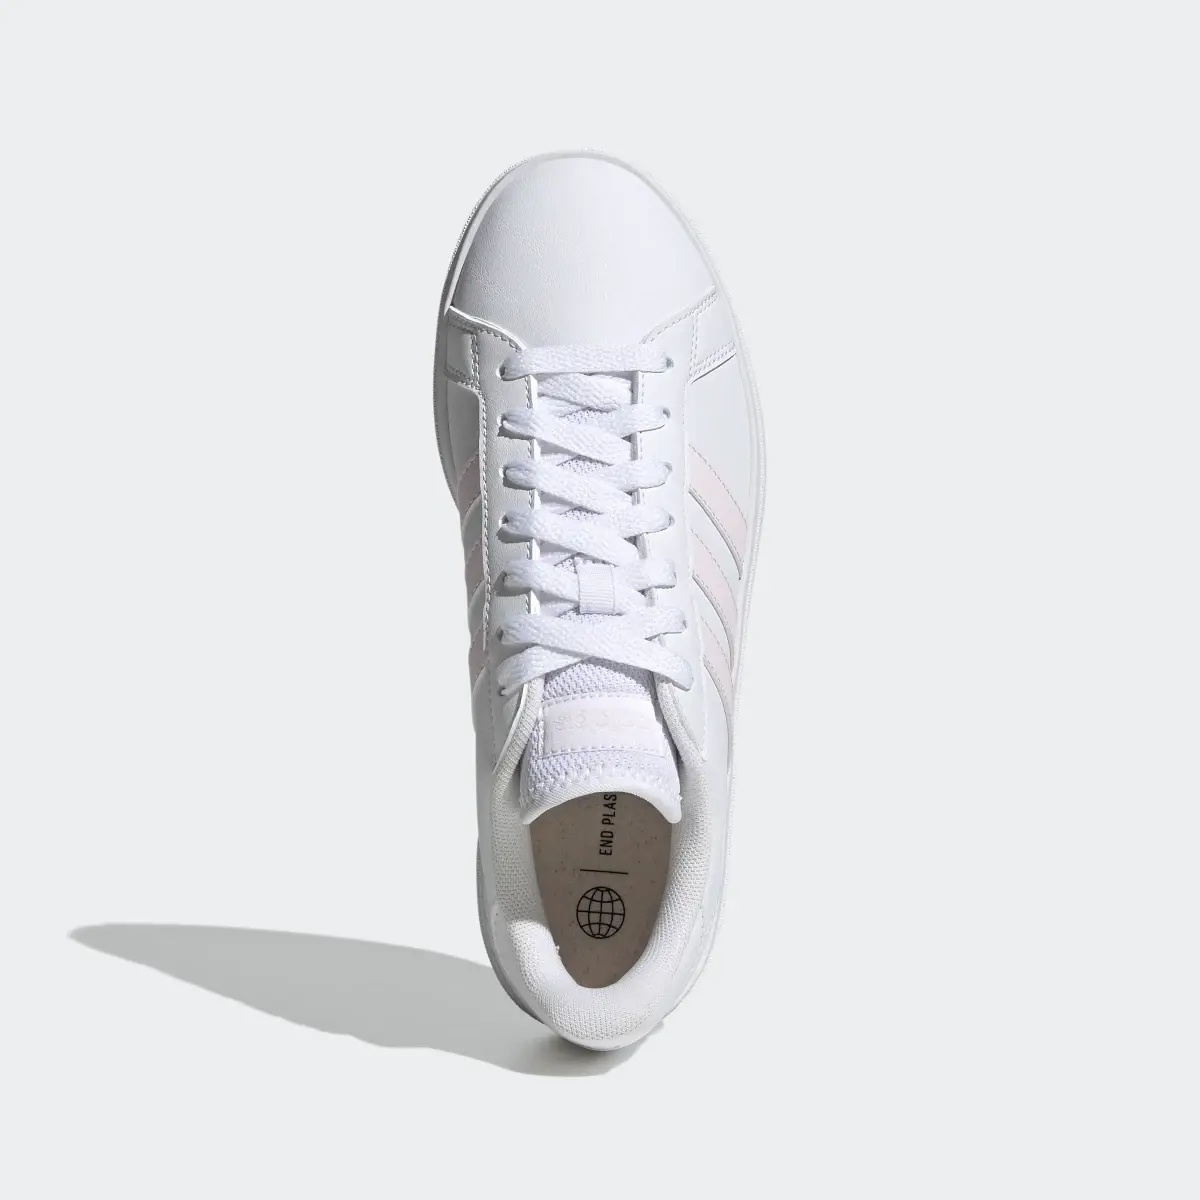 Adidas Grand Court TD Lifestyle Court Casual Shoes. 3